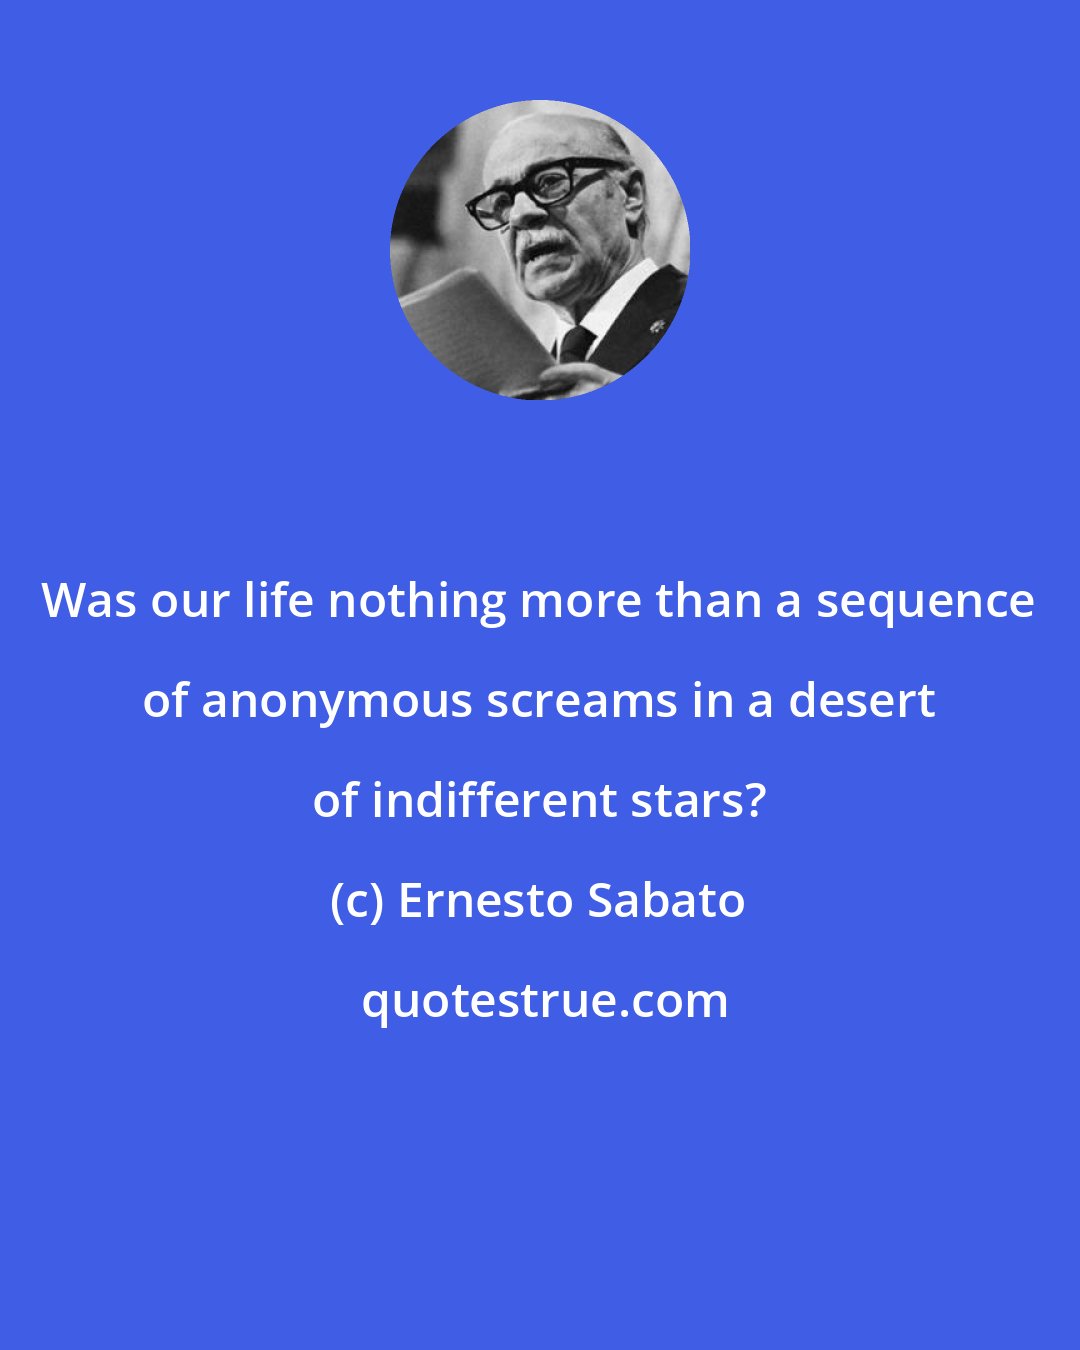 Ernesto Sabato: Was our life nothing more than a sequence of anonymous screams in a desert of indifferent stars?